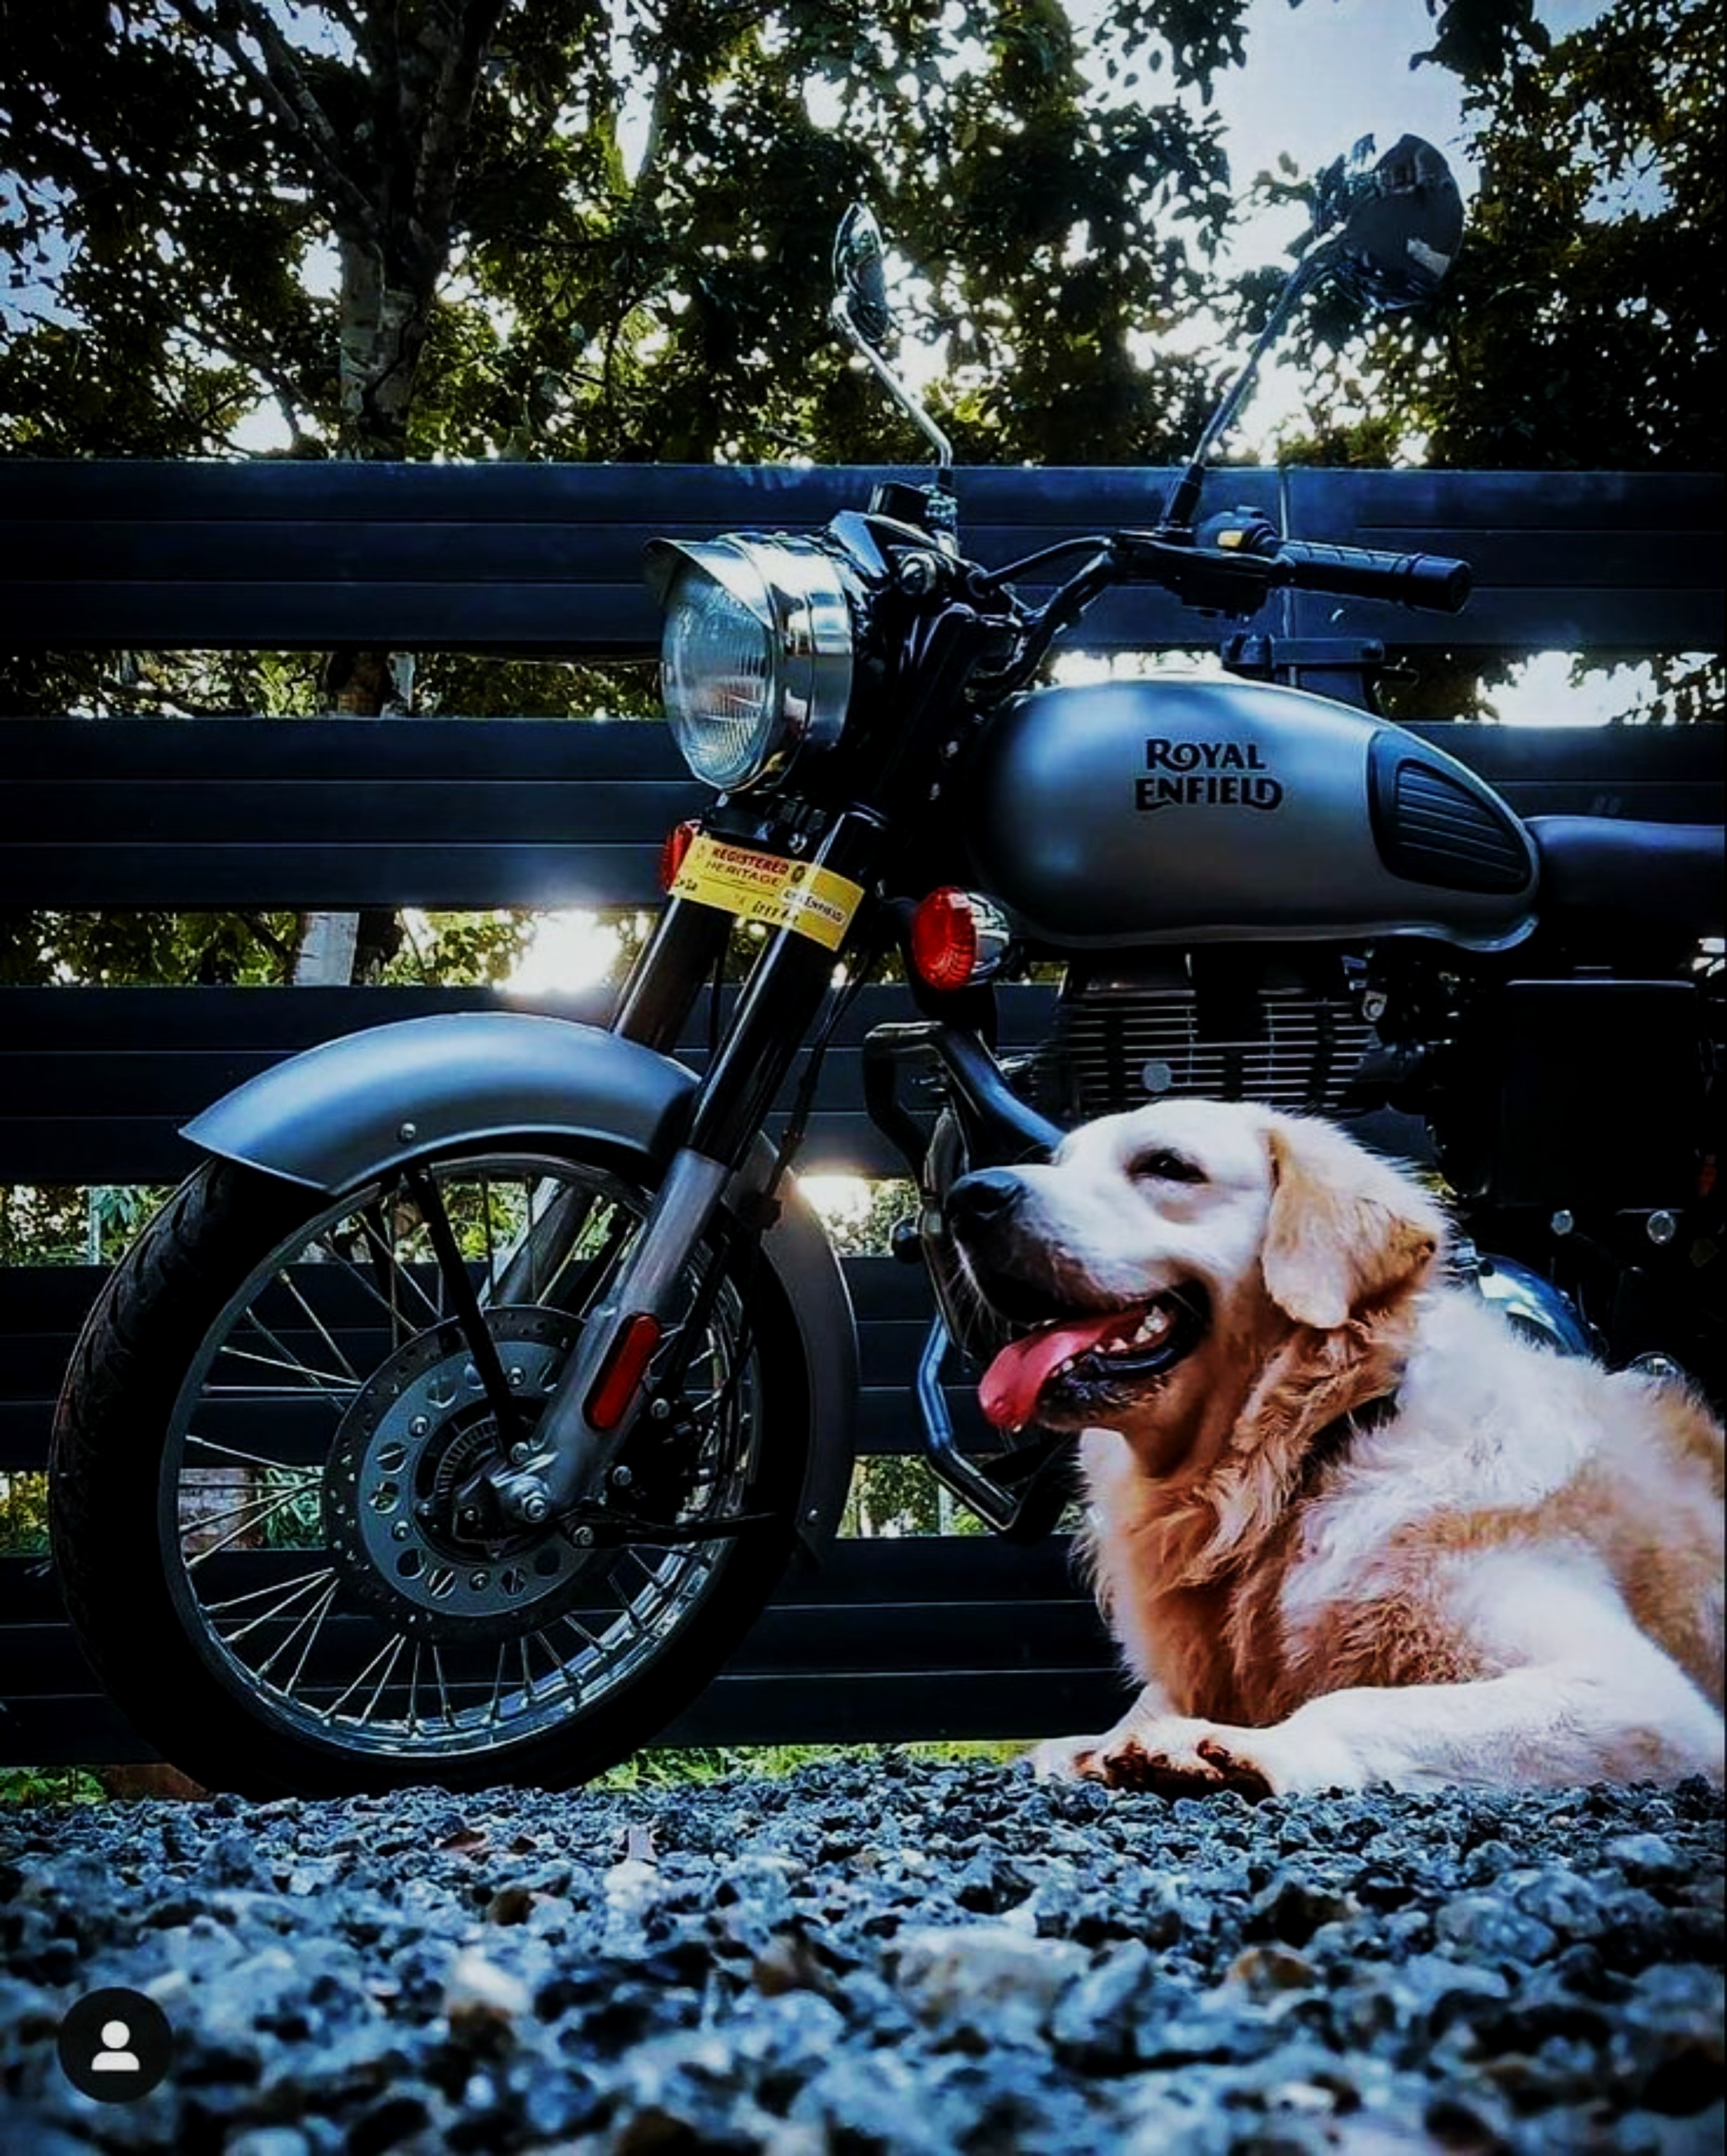 You are currently viewing Bike with dog image download for editing free